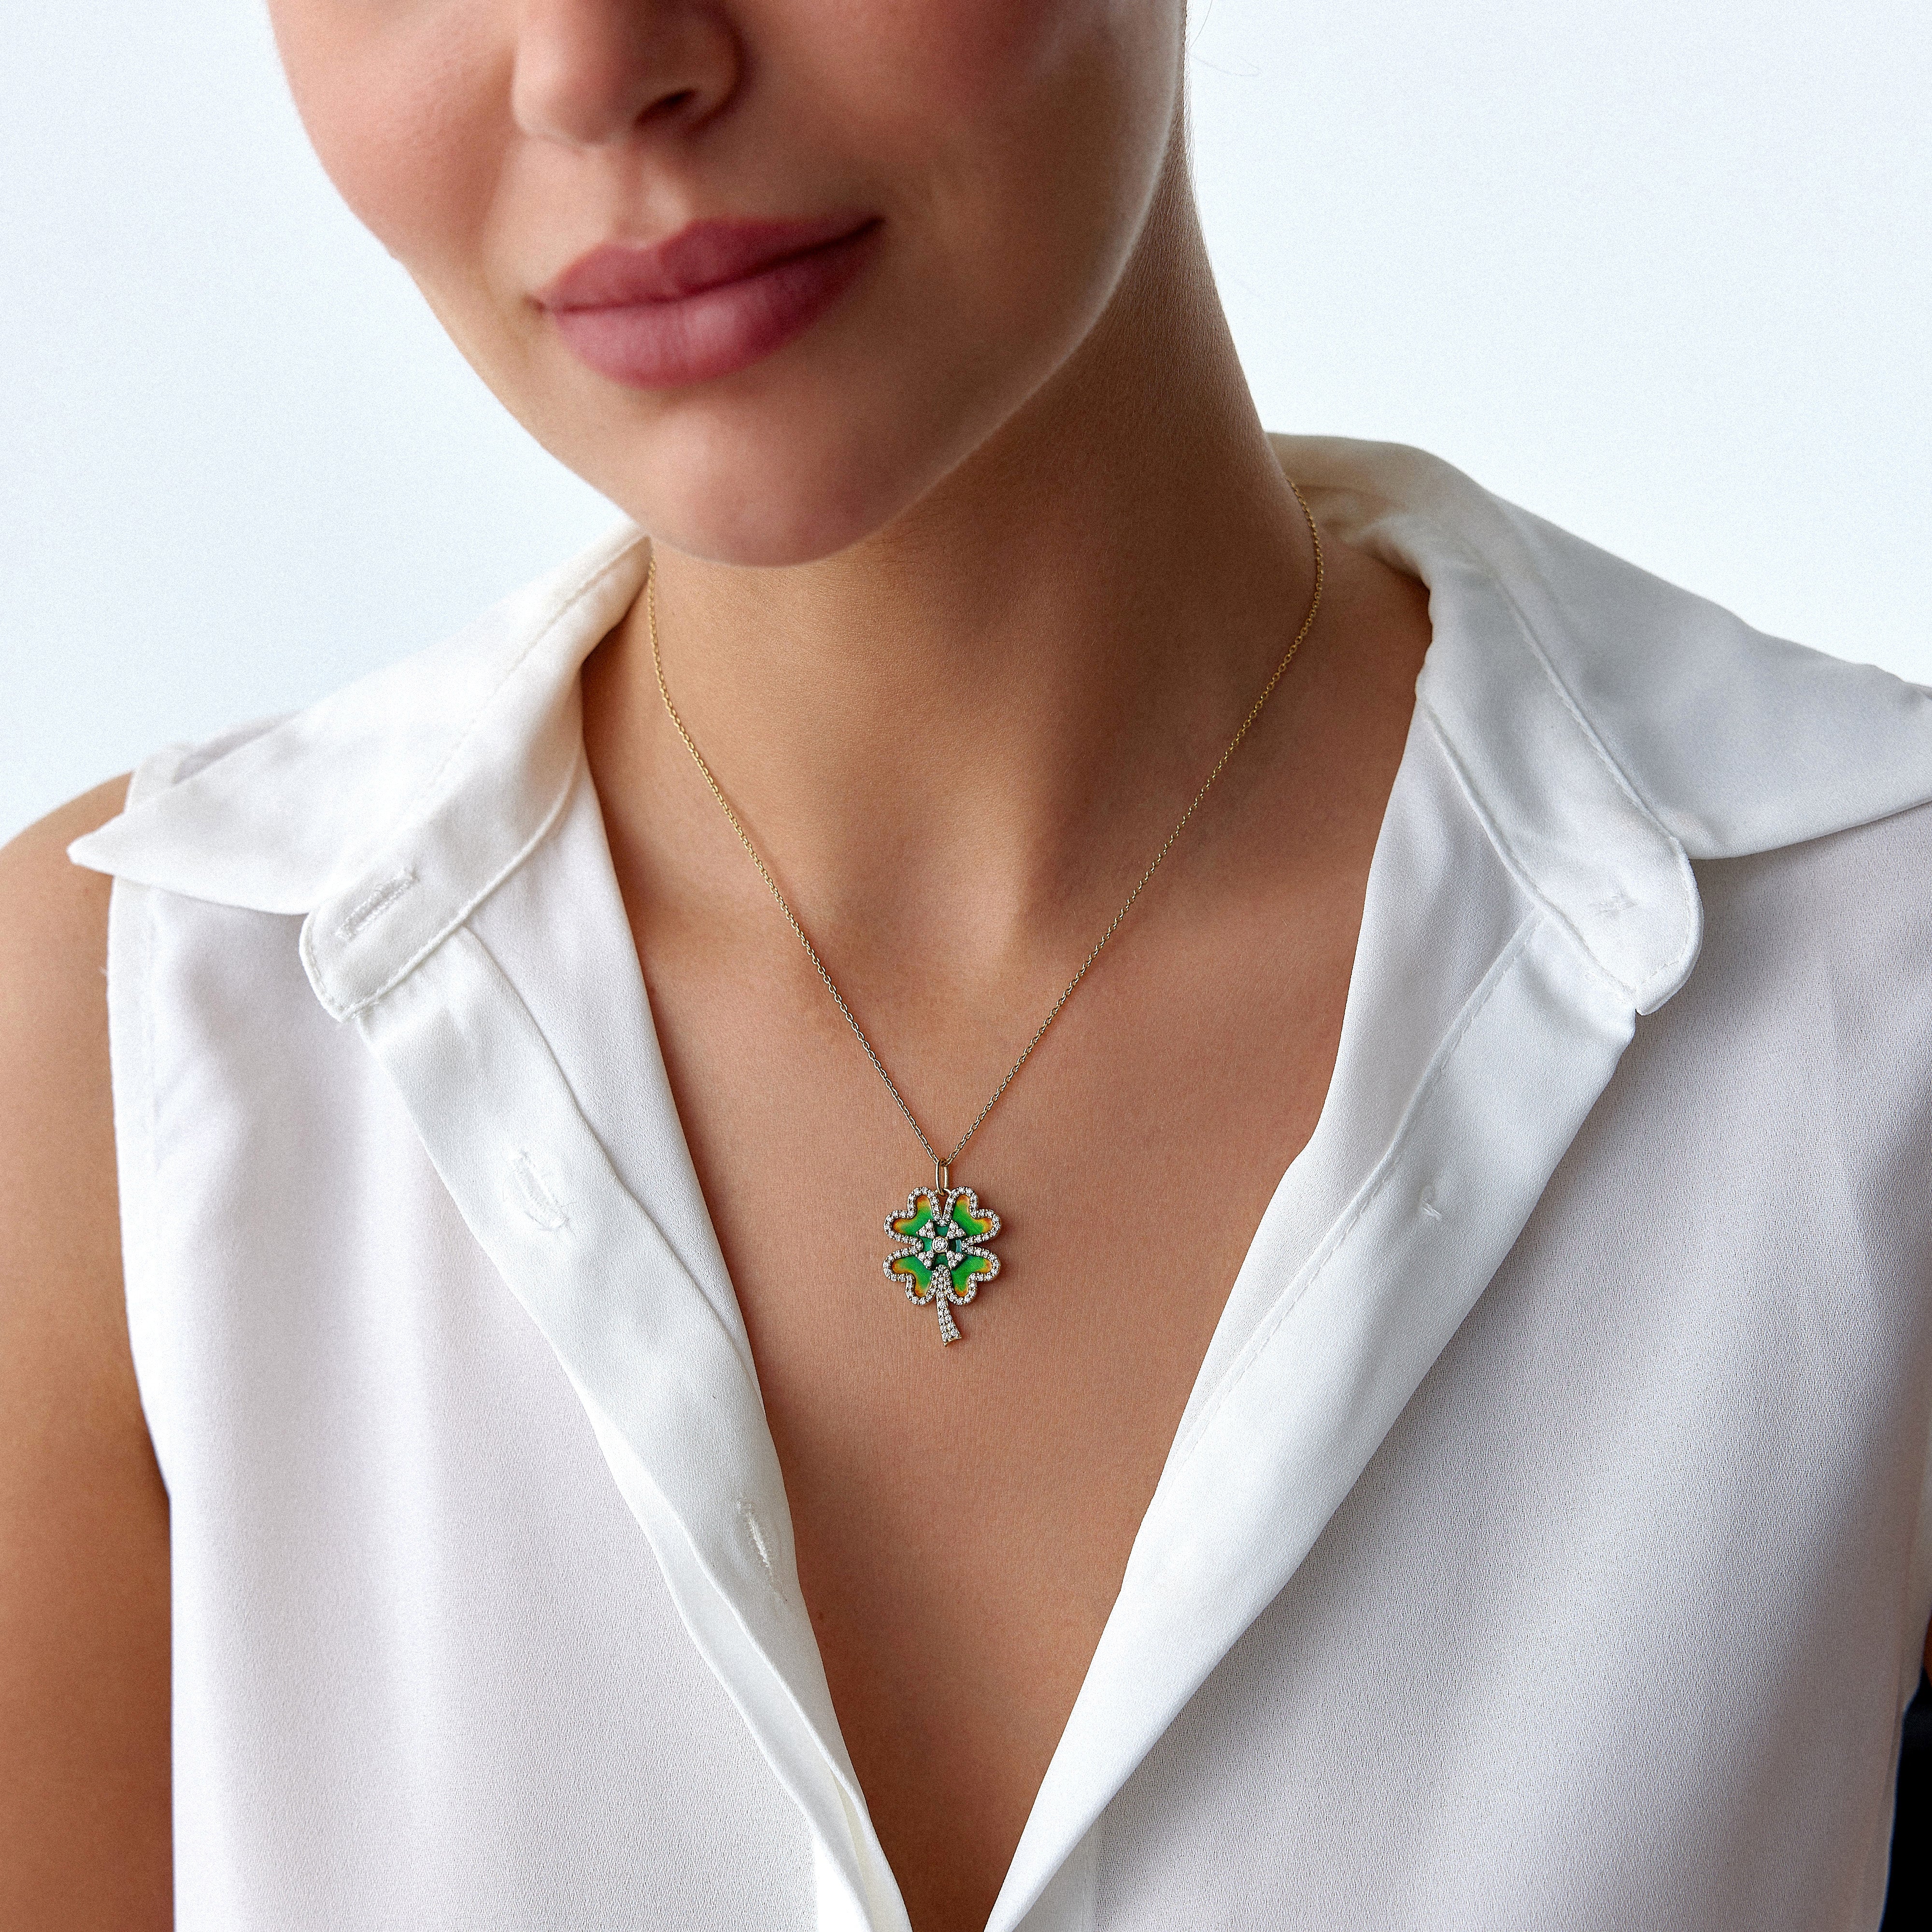 Diamond Clover Pendant Necklace Available in 14K and 18K Gold / FORTUNA